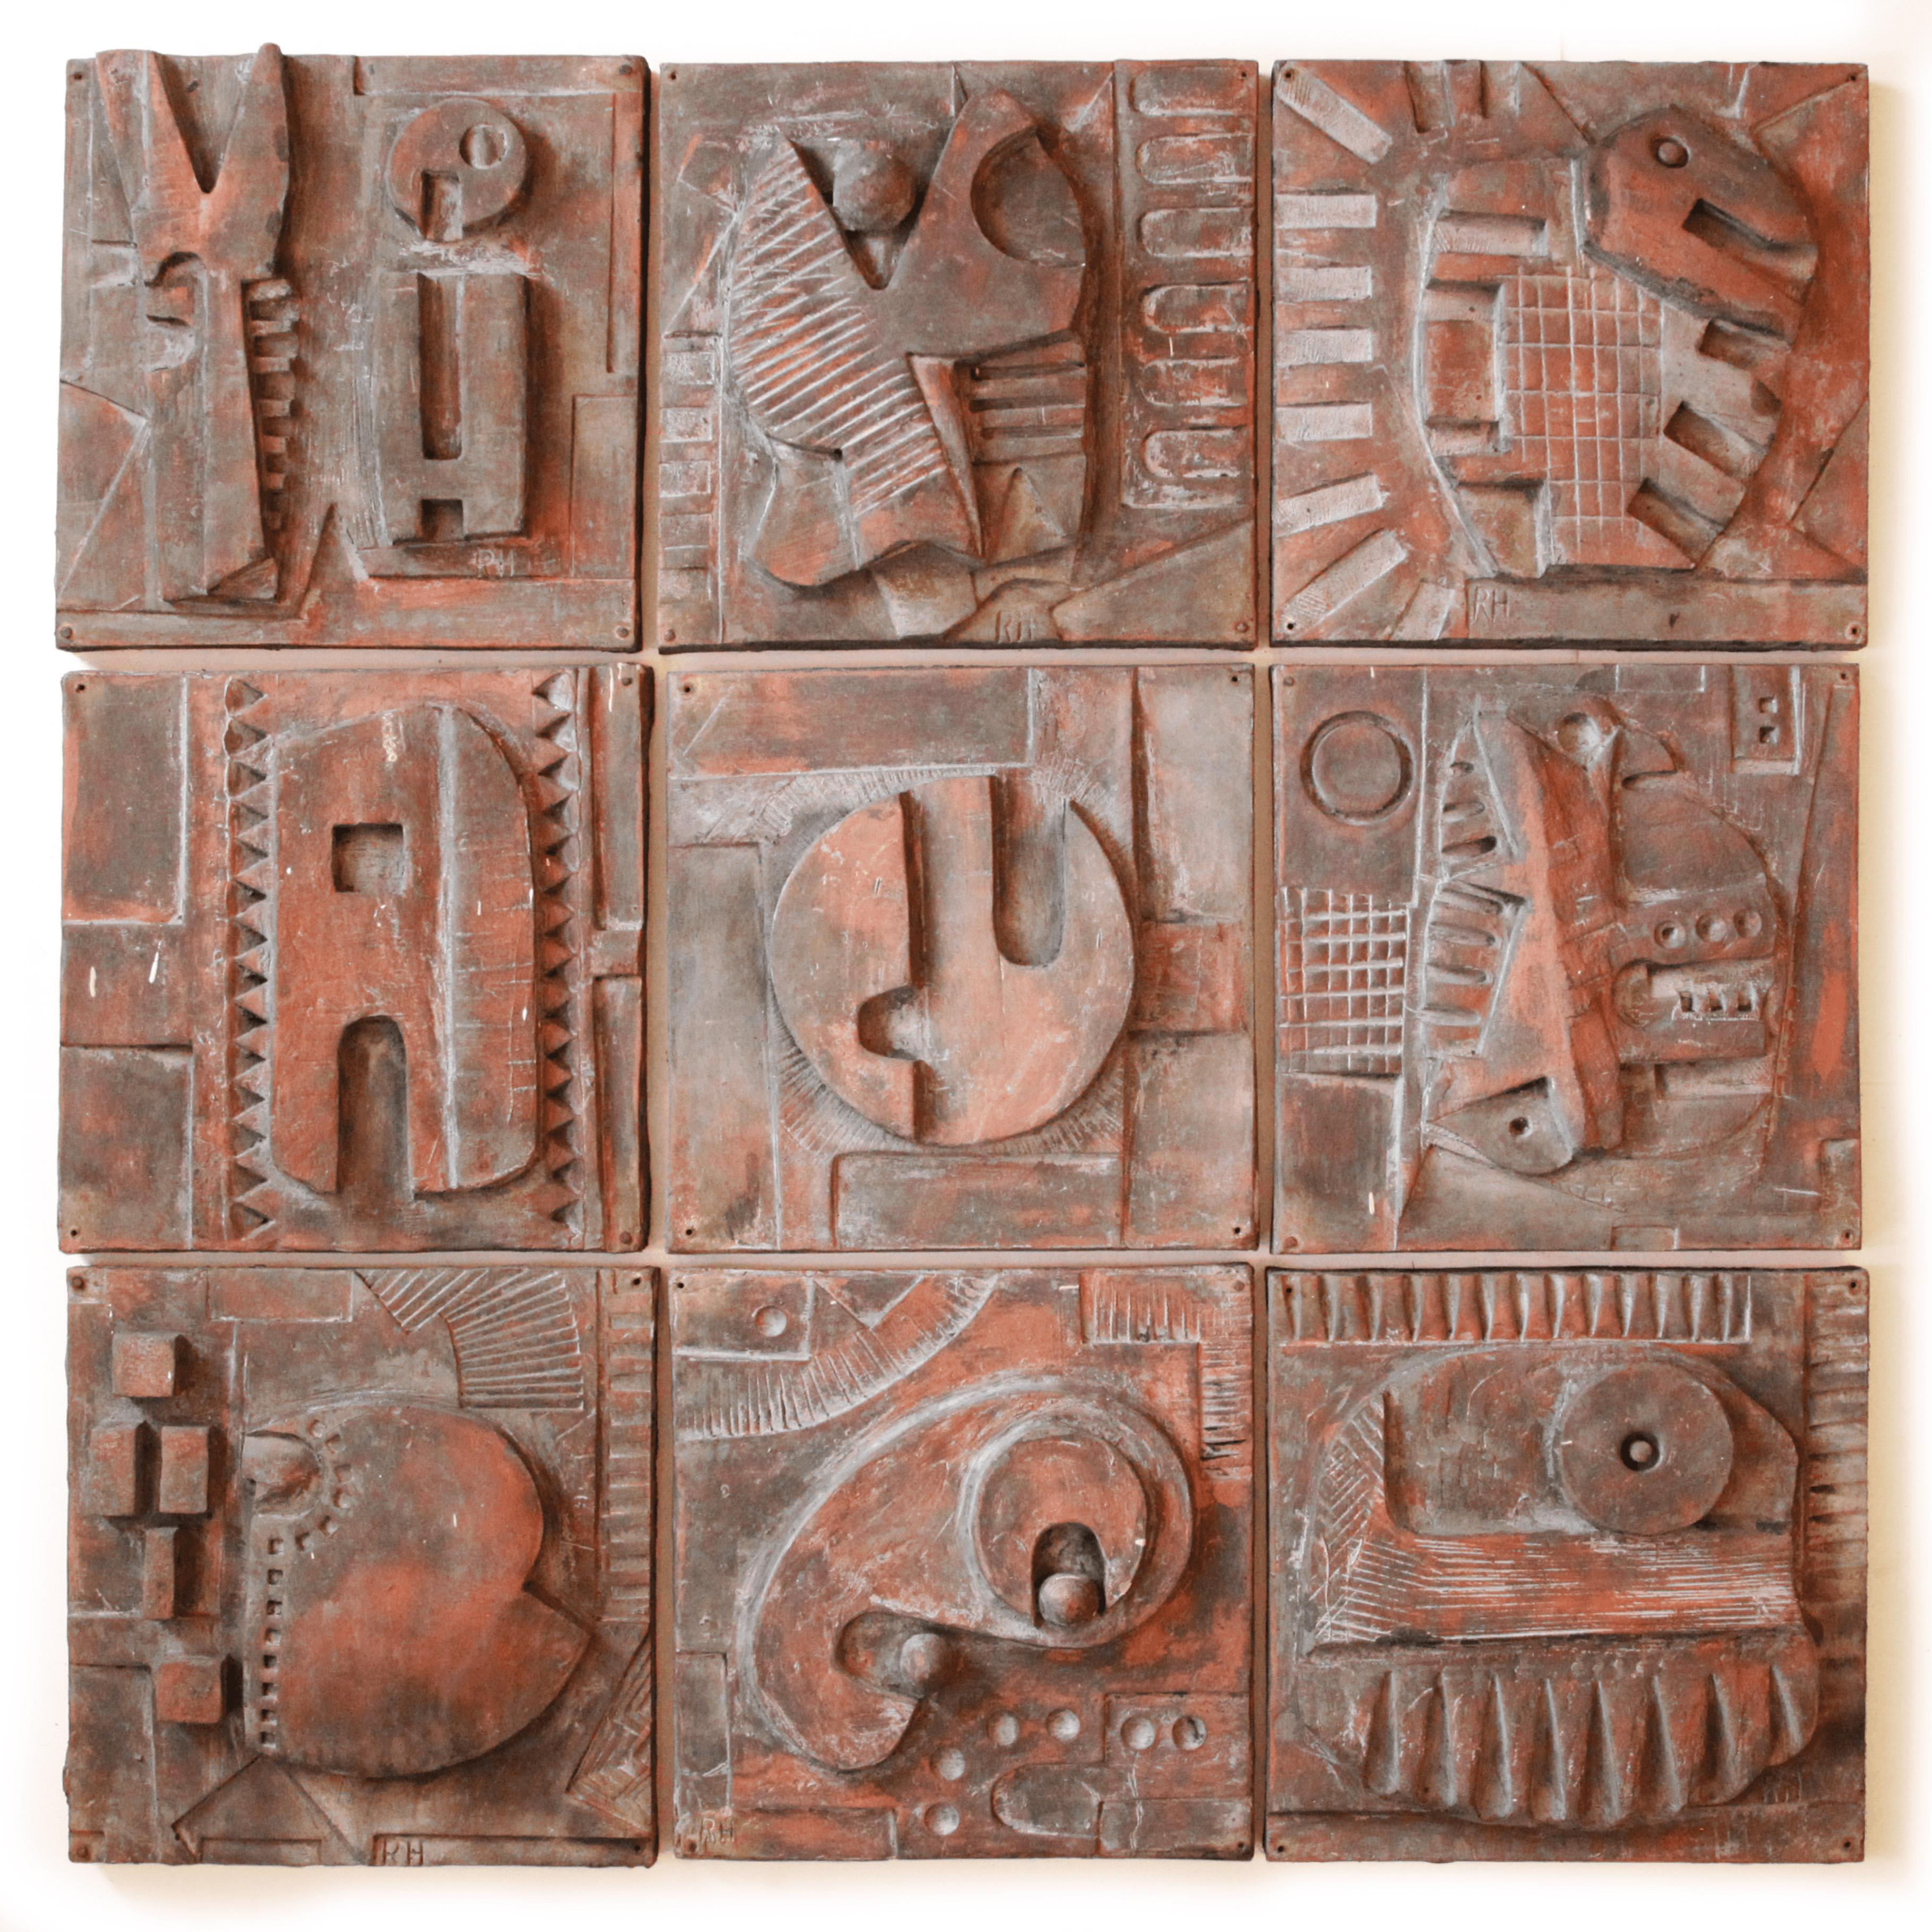 Stunning original panel made of 9 handmade fibreglass relief sculptures from the artist's own home. Each sculpture is unique, with beautiful rust and copper tones, and several are signed by the artist.

This very large, striking piece has a great